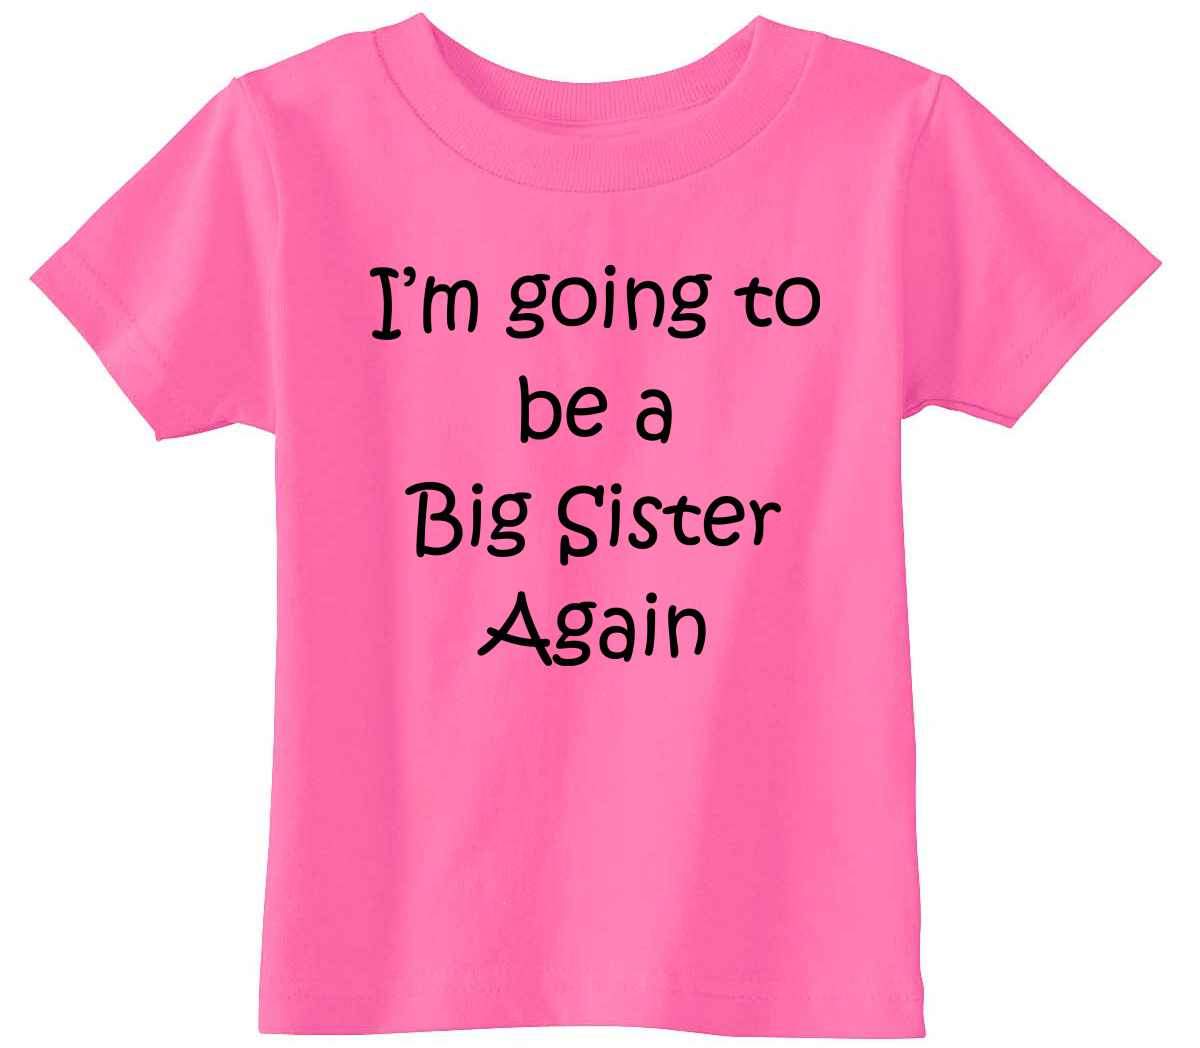 I'm Going to be a Big Sister Again Infant/Toddler 